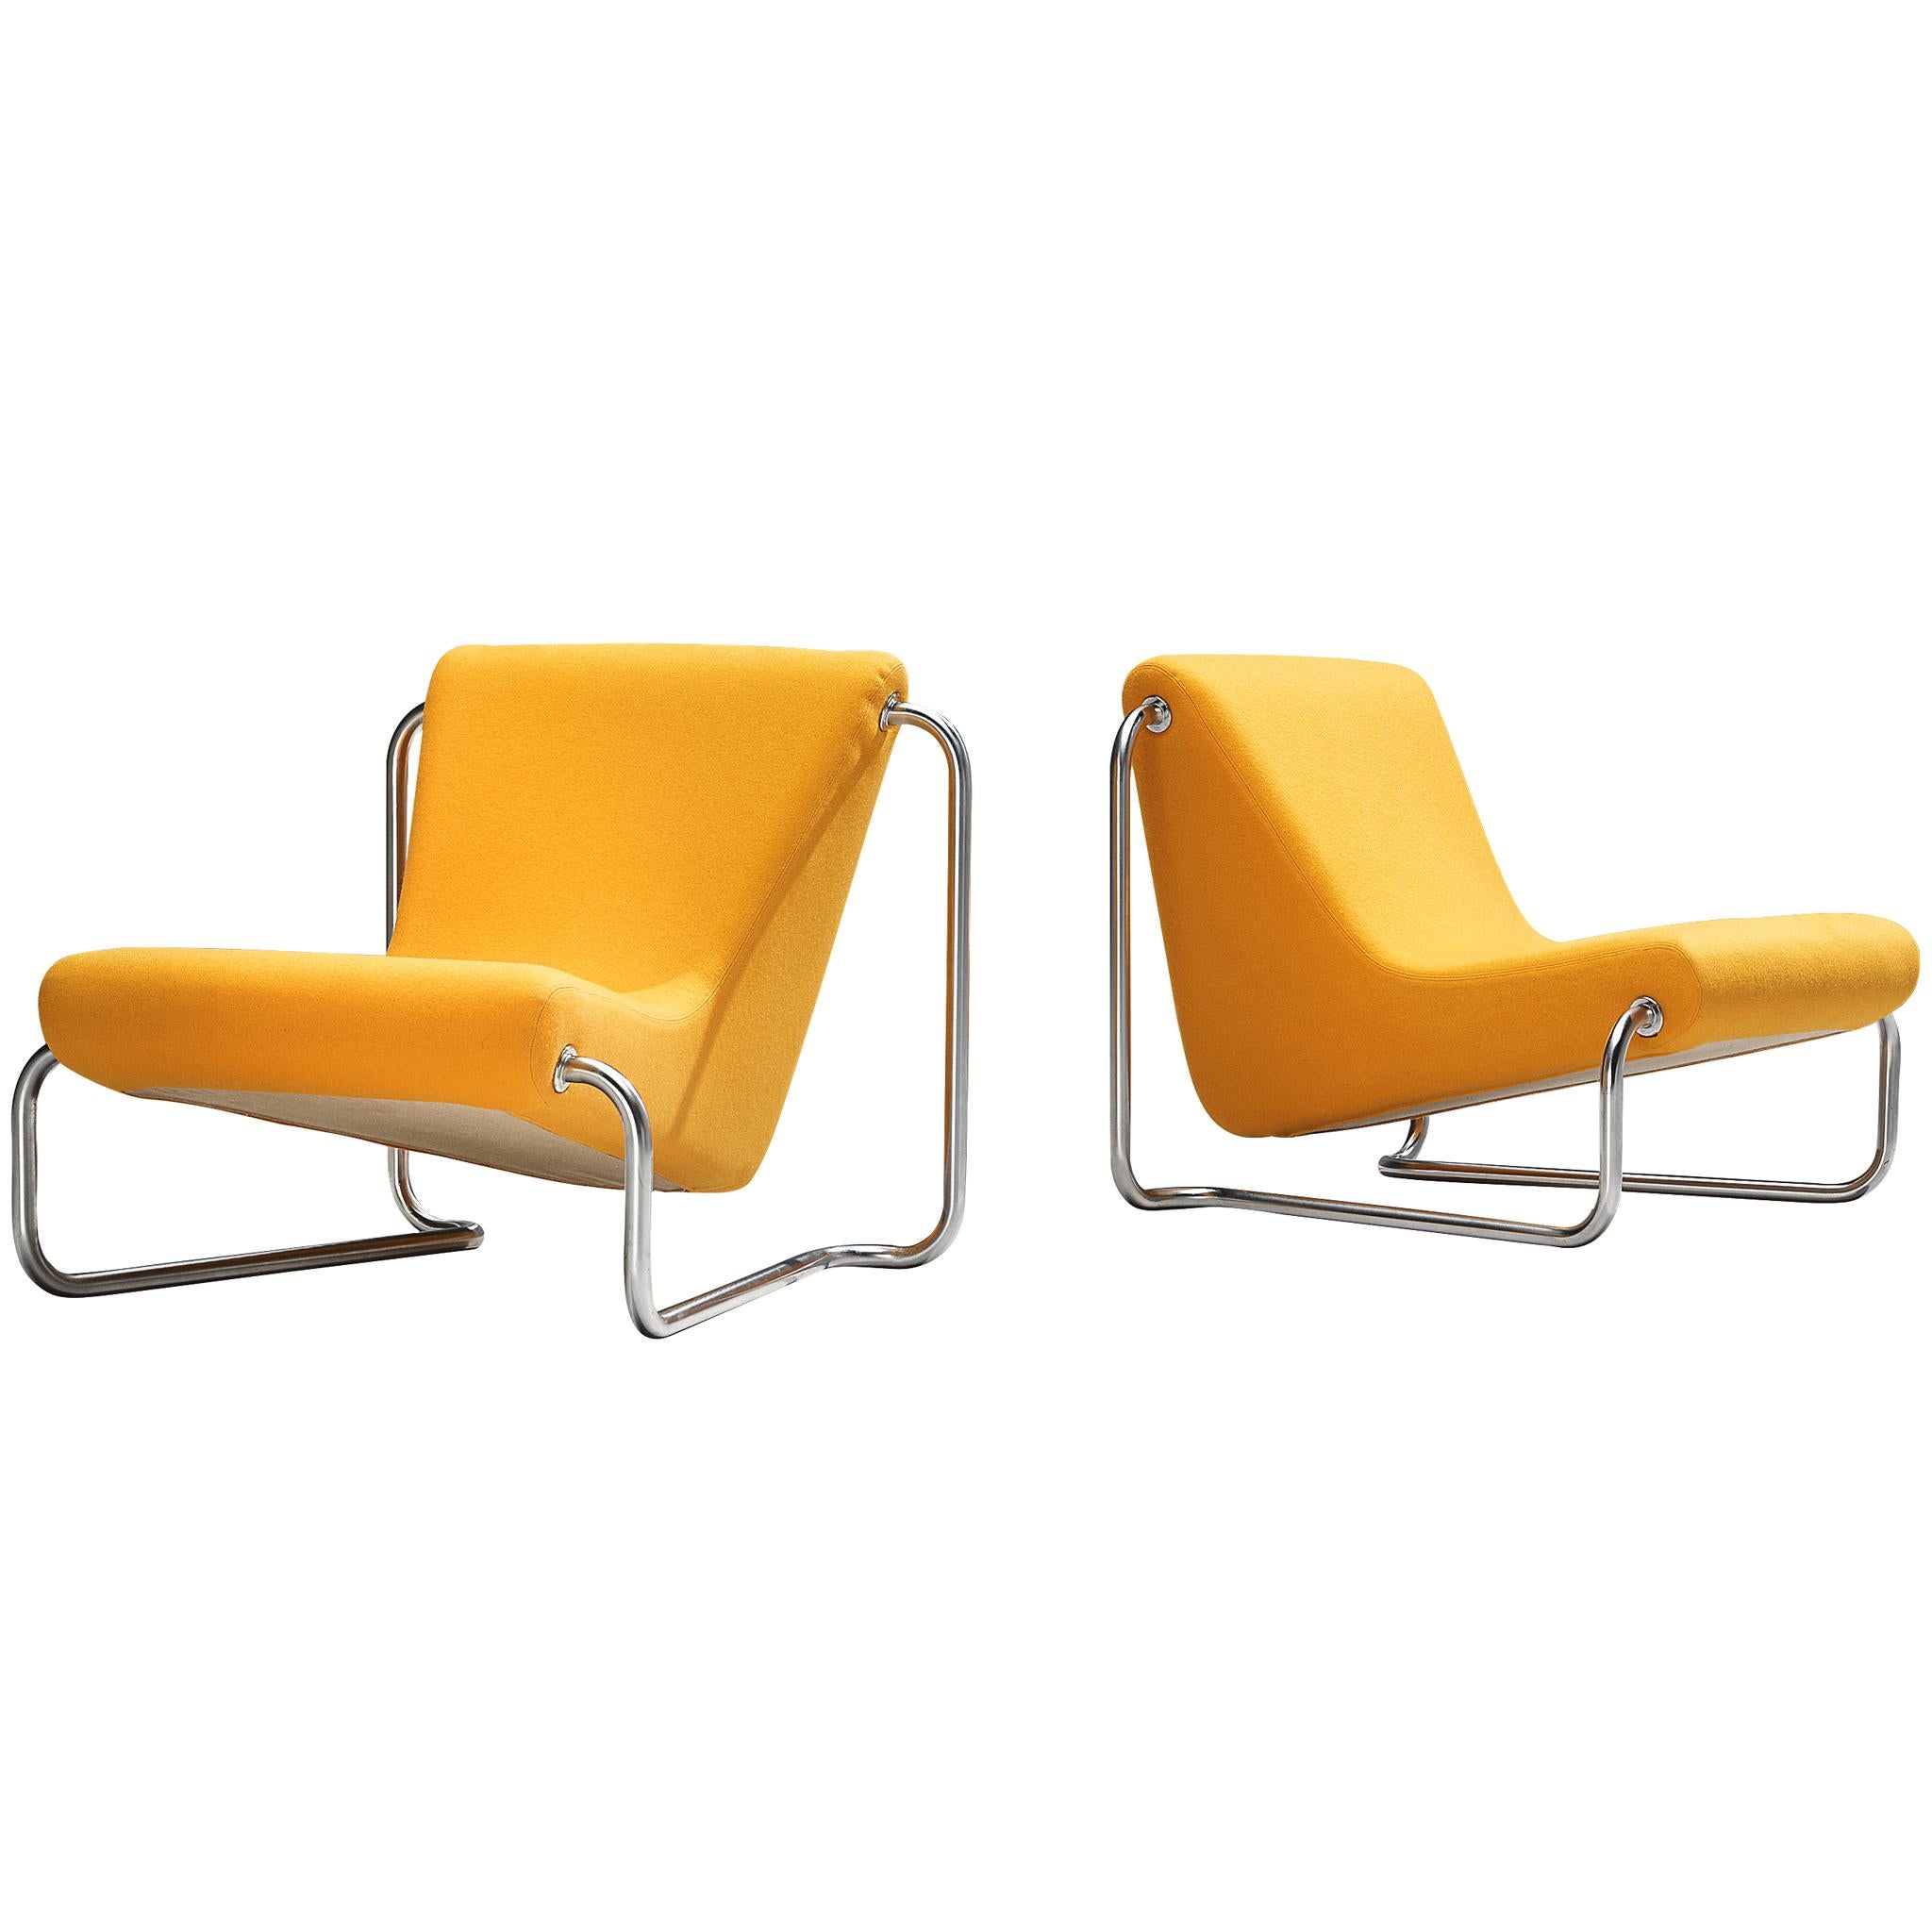 Rare Luigi Colani Pair of Lounge Chairs in Orange Upholstery For Sale